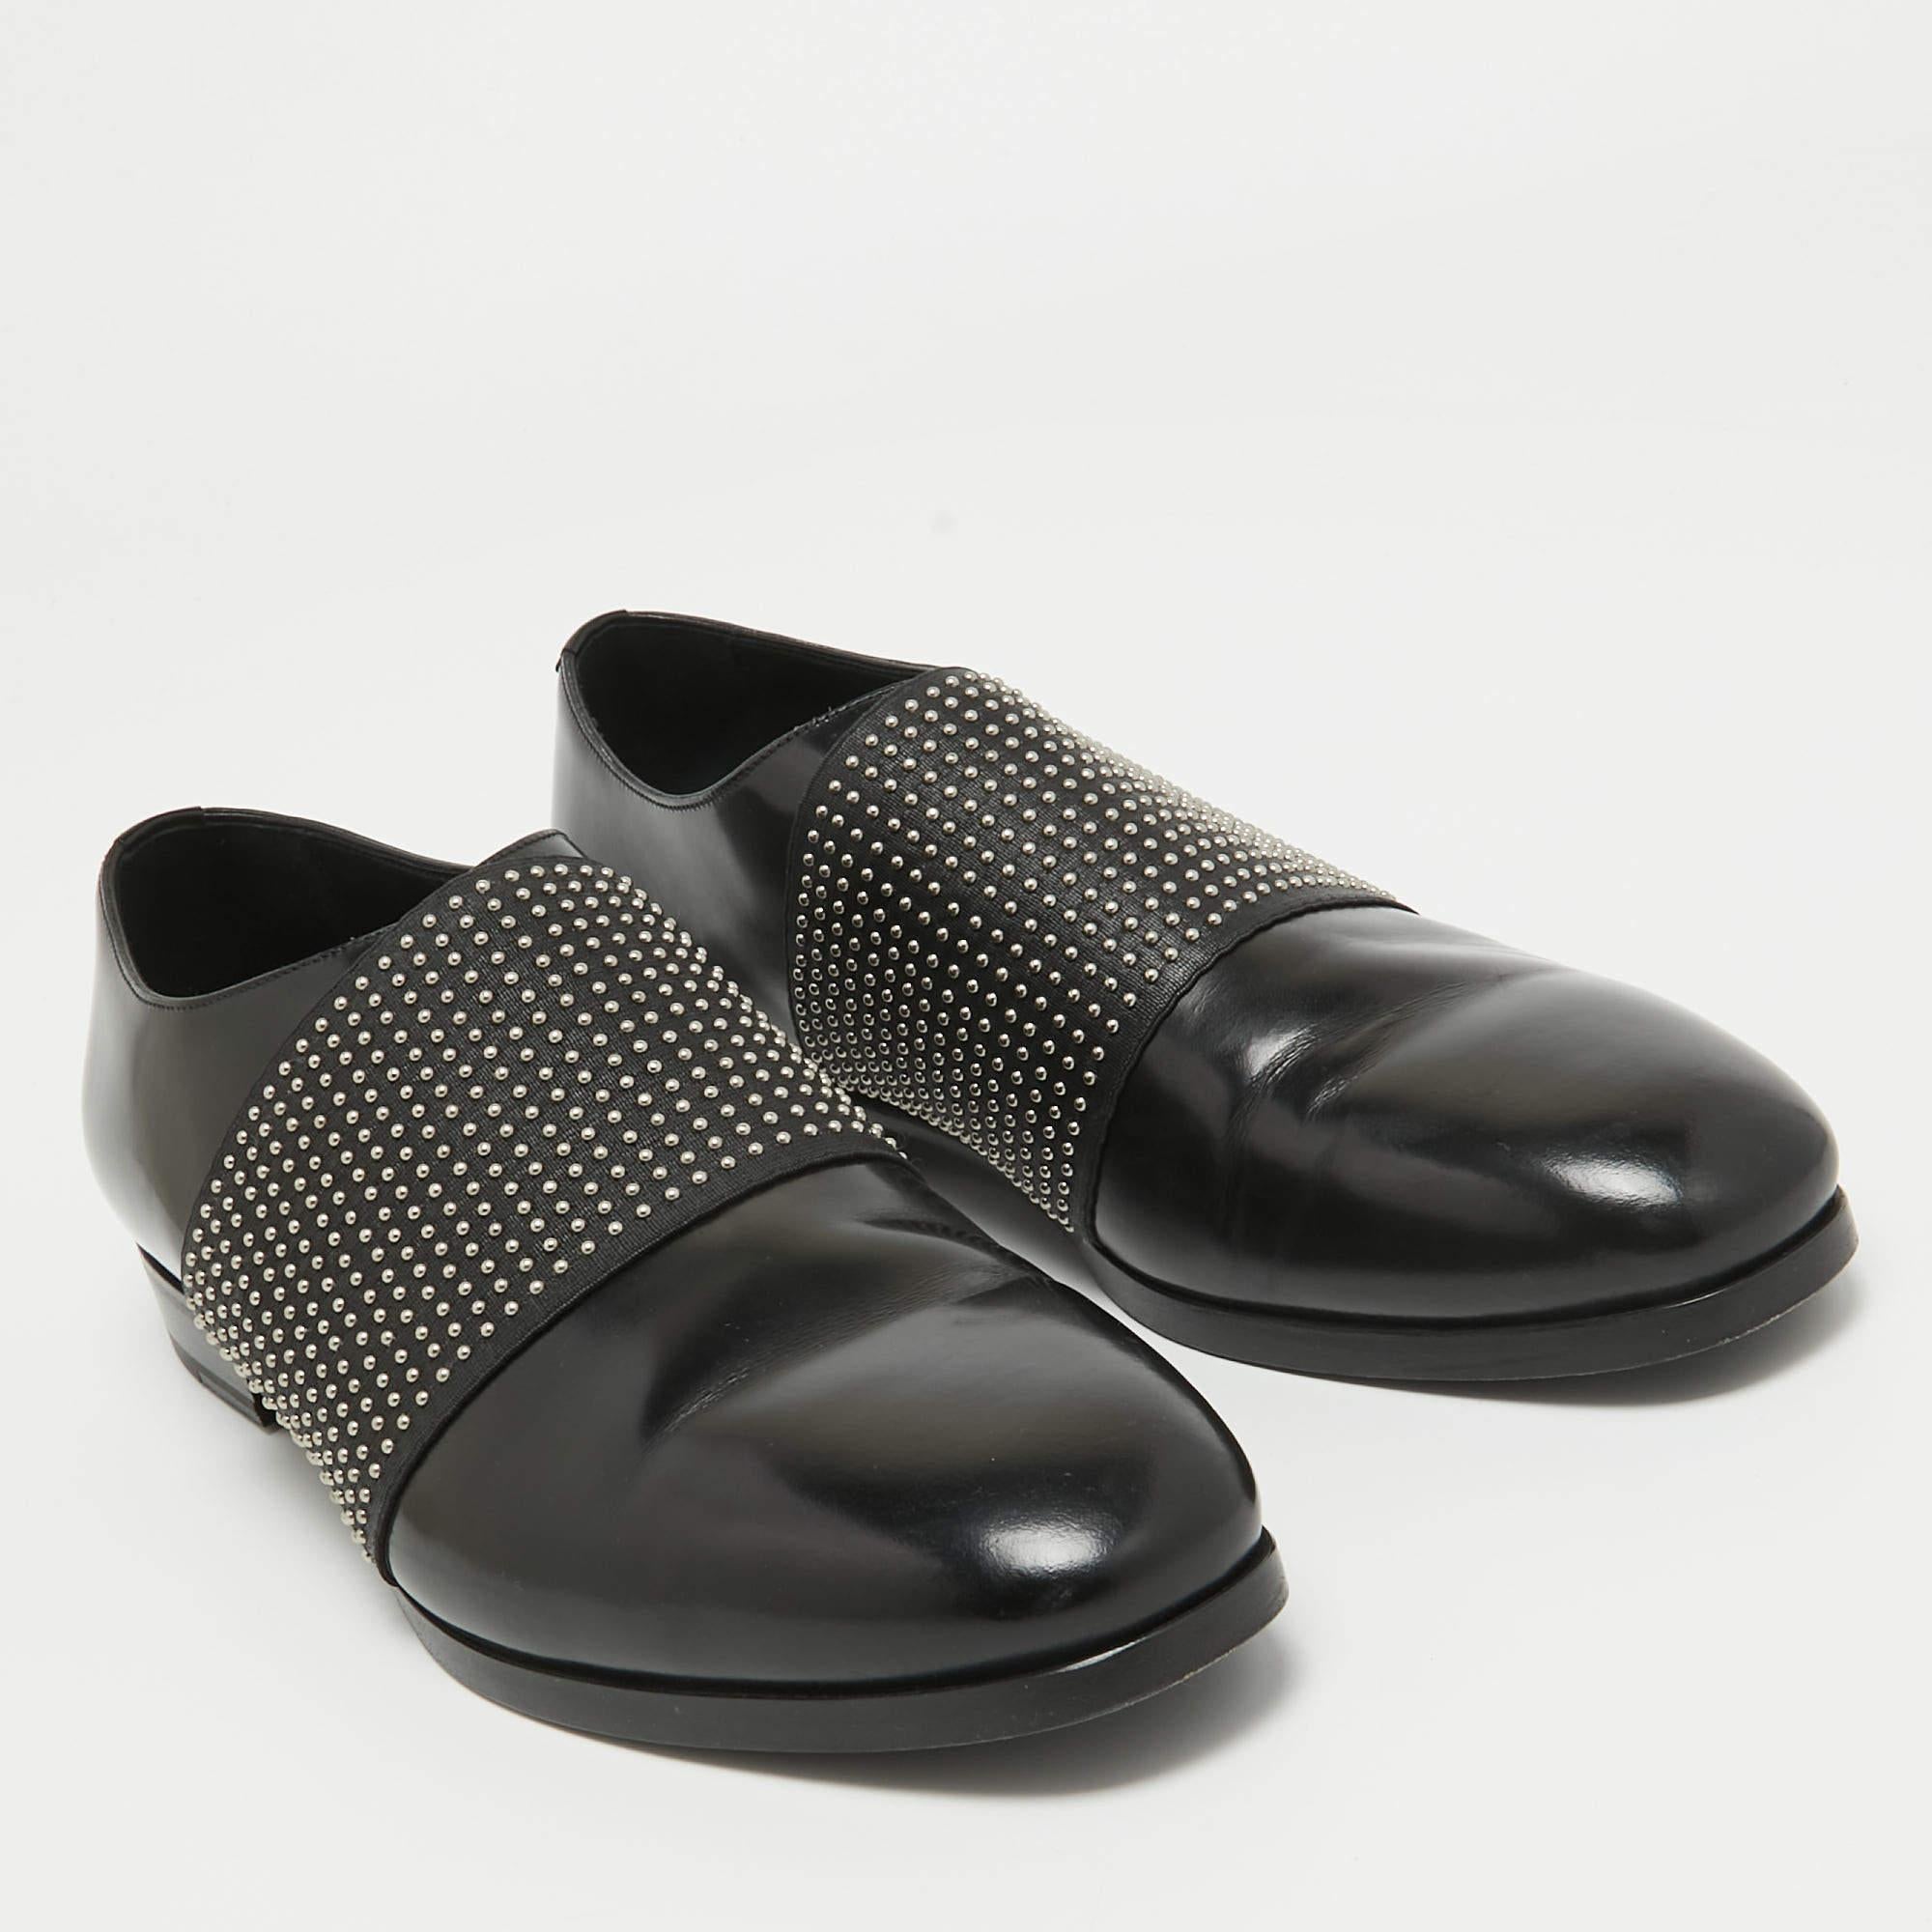 Jimmy Choo Black Leather Embellished Slip On Loafers Size 42 In Good Condition For Sale In Dubai, Al Qouz 2